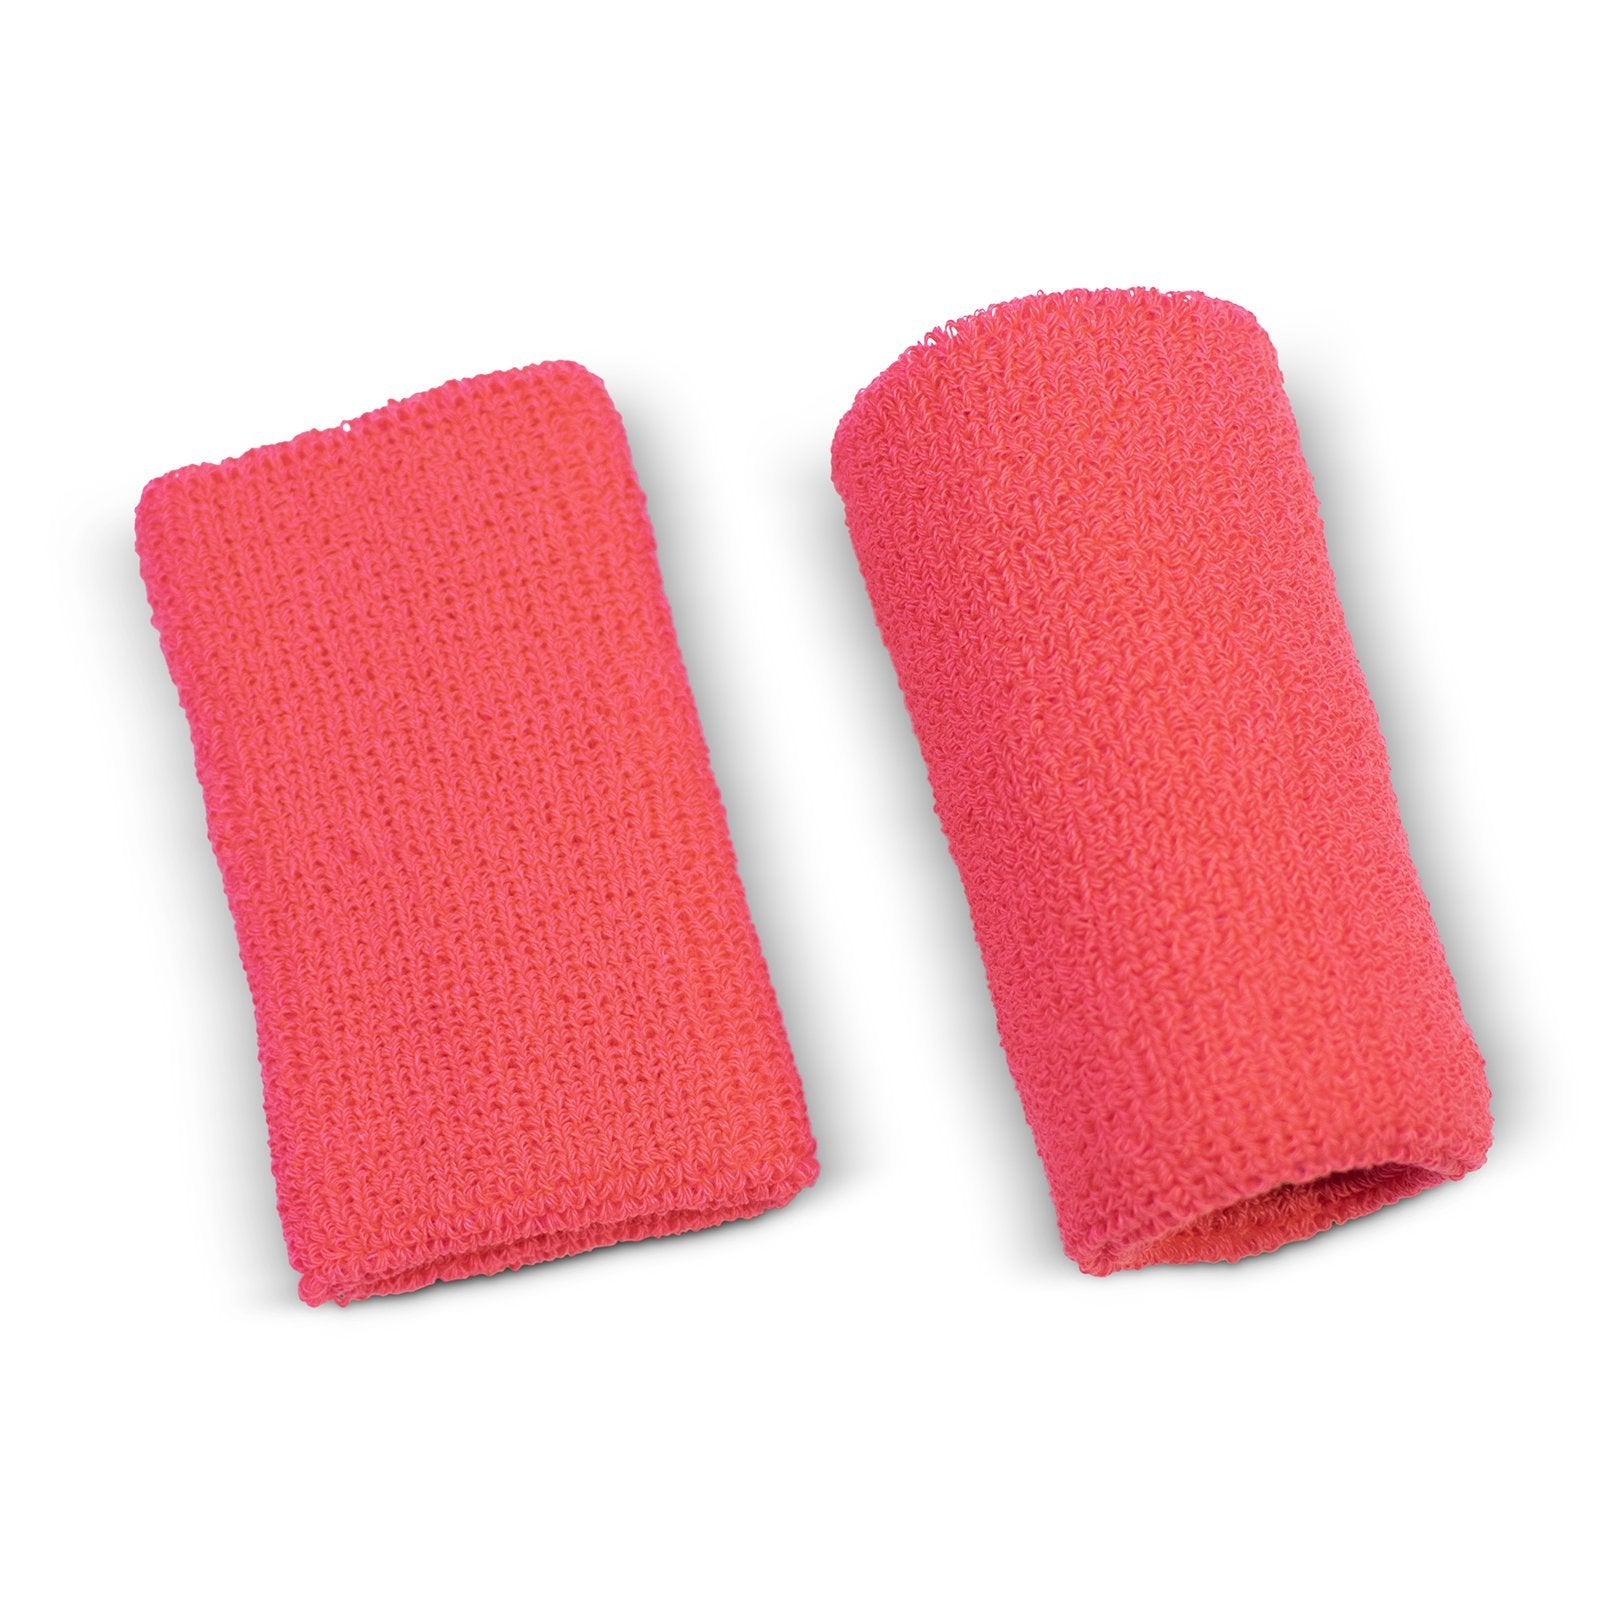 US Glove Sweat Bands for Wrists, Sports Wristbands for Men & Women